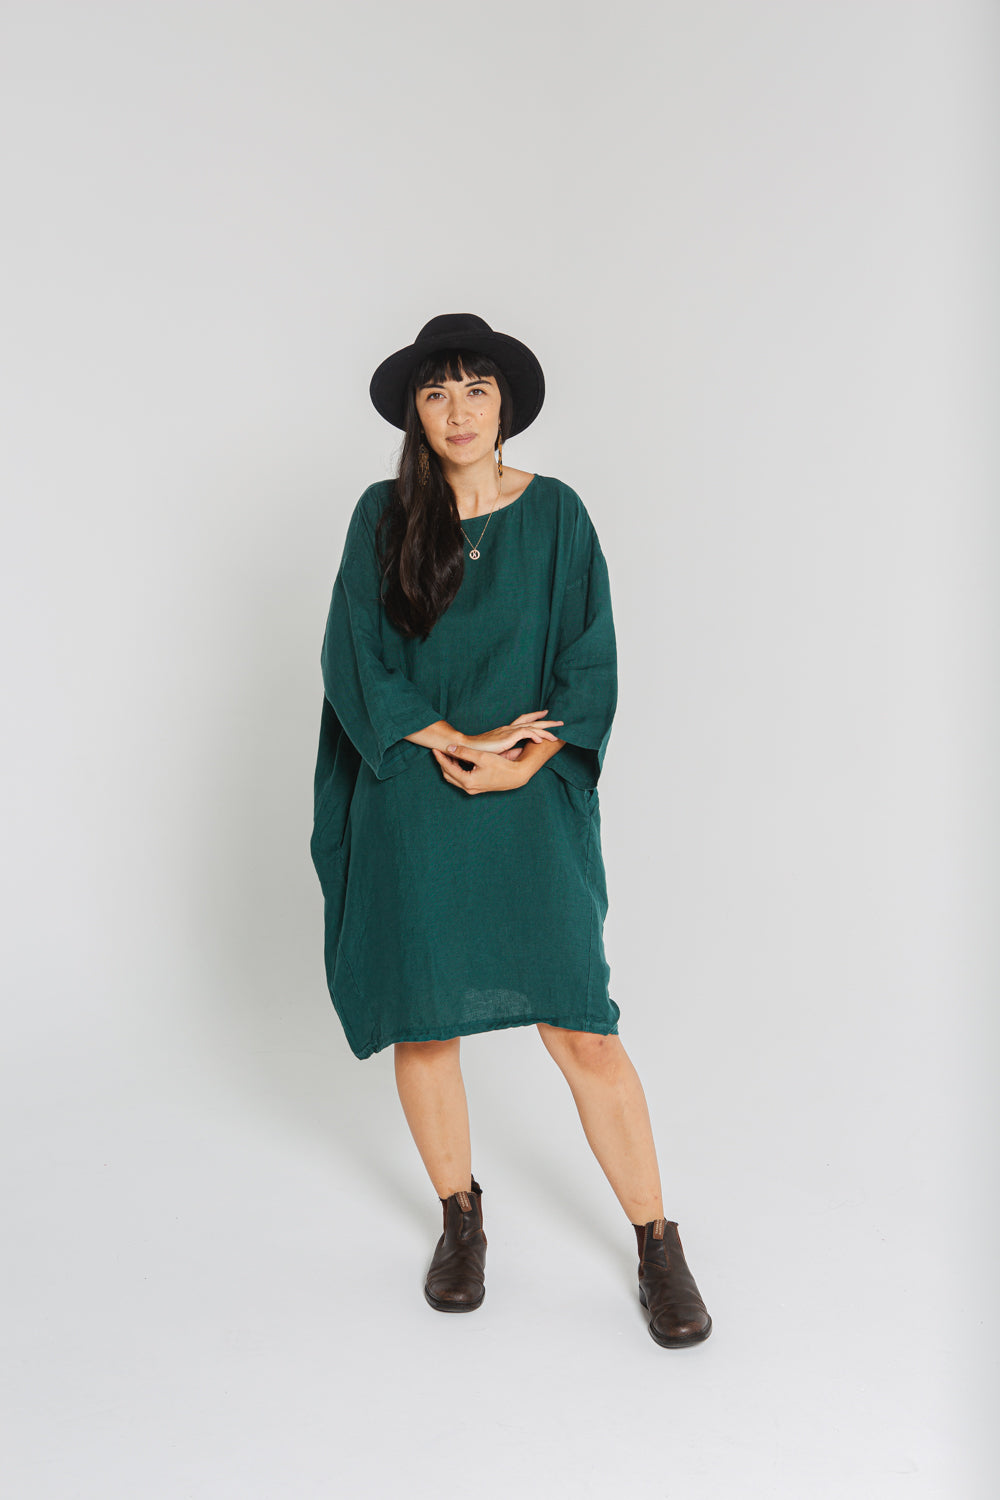 VENICE Linen Tunic Dress – Love and Confuse